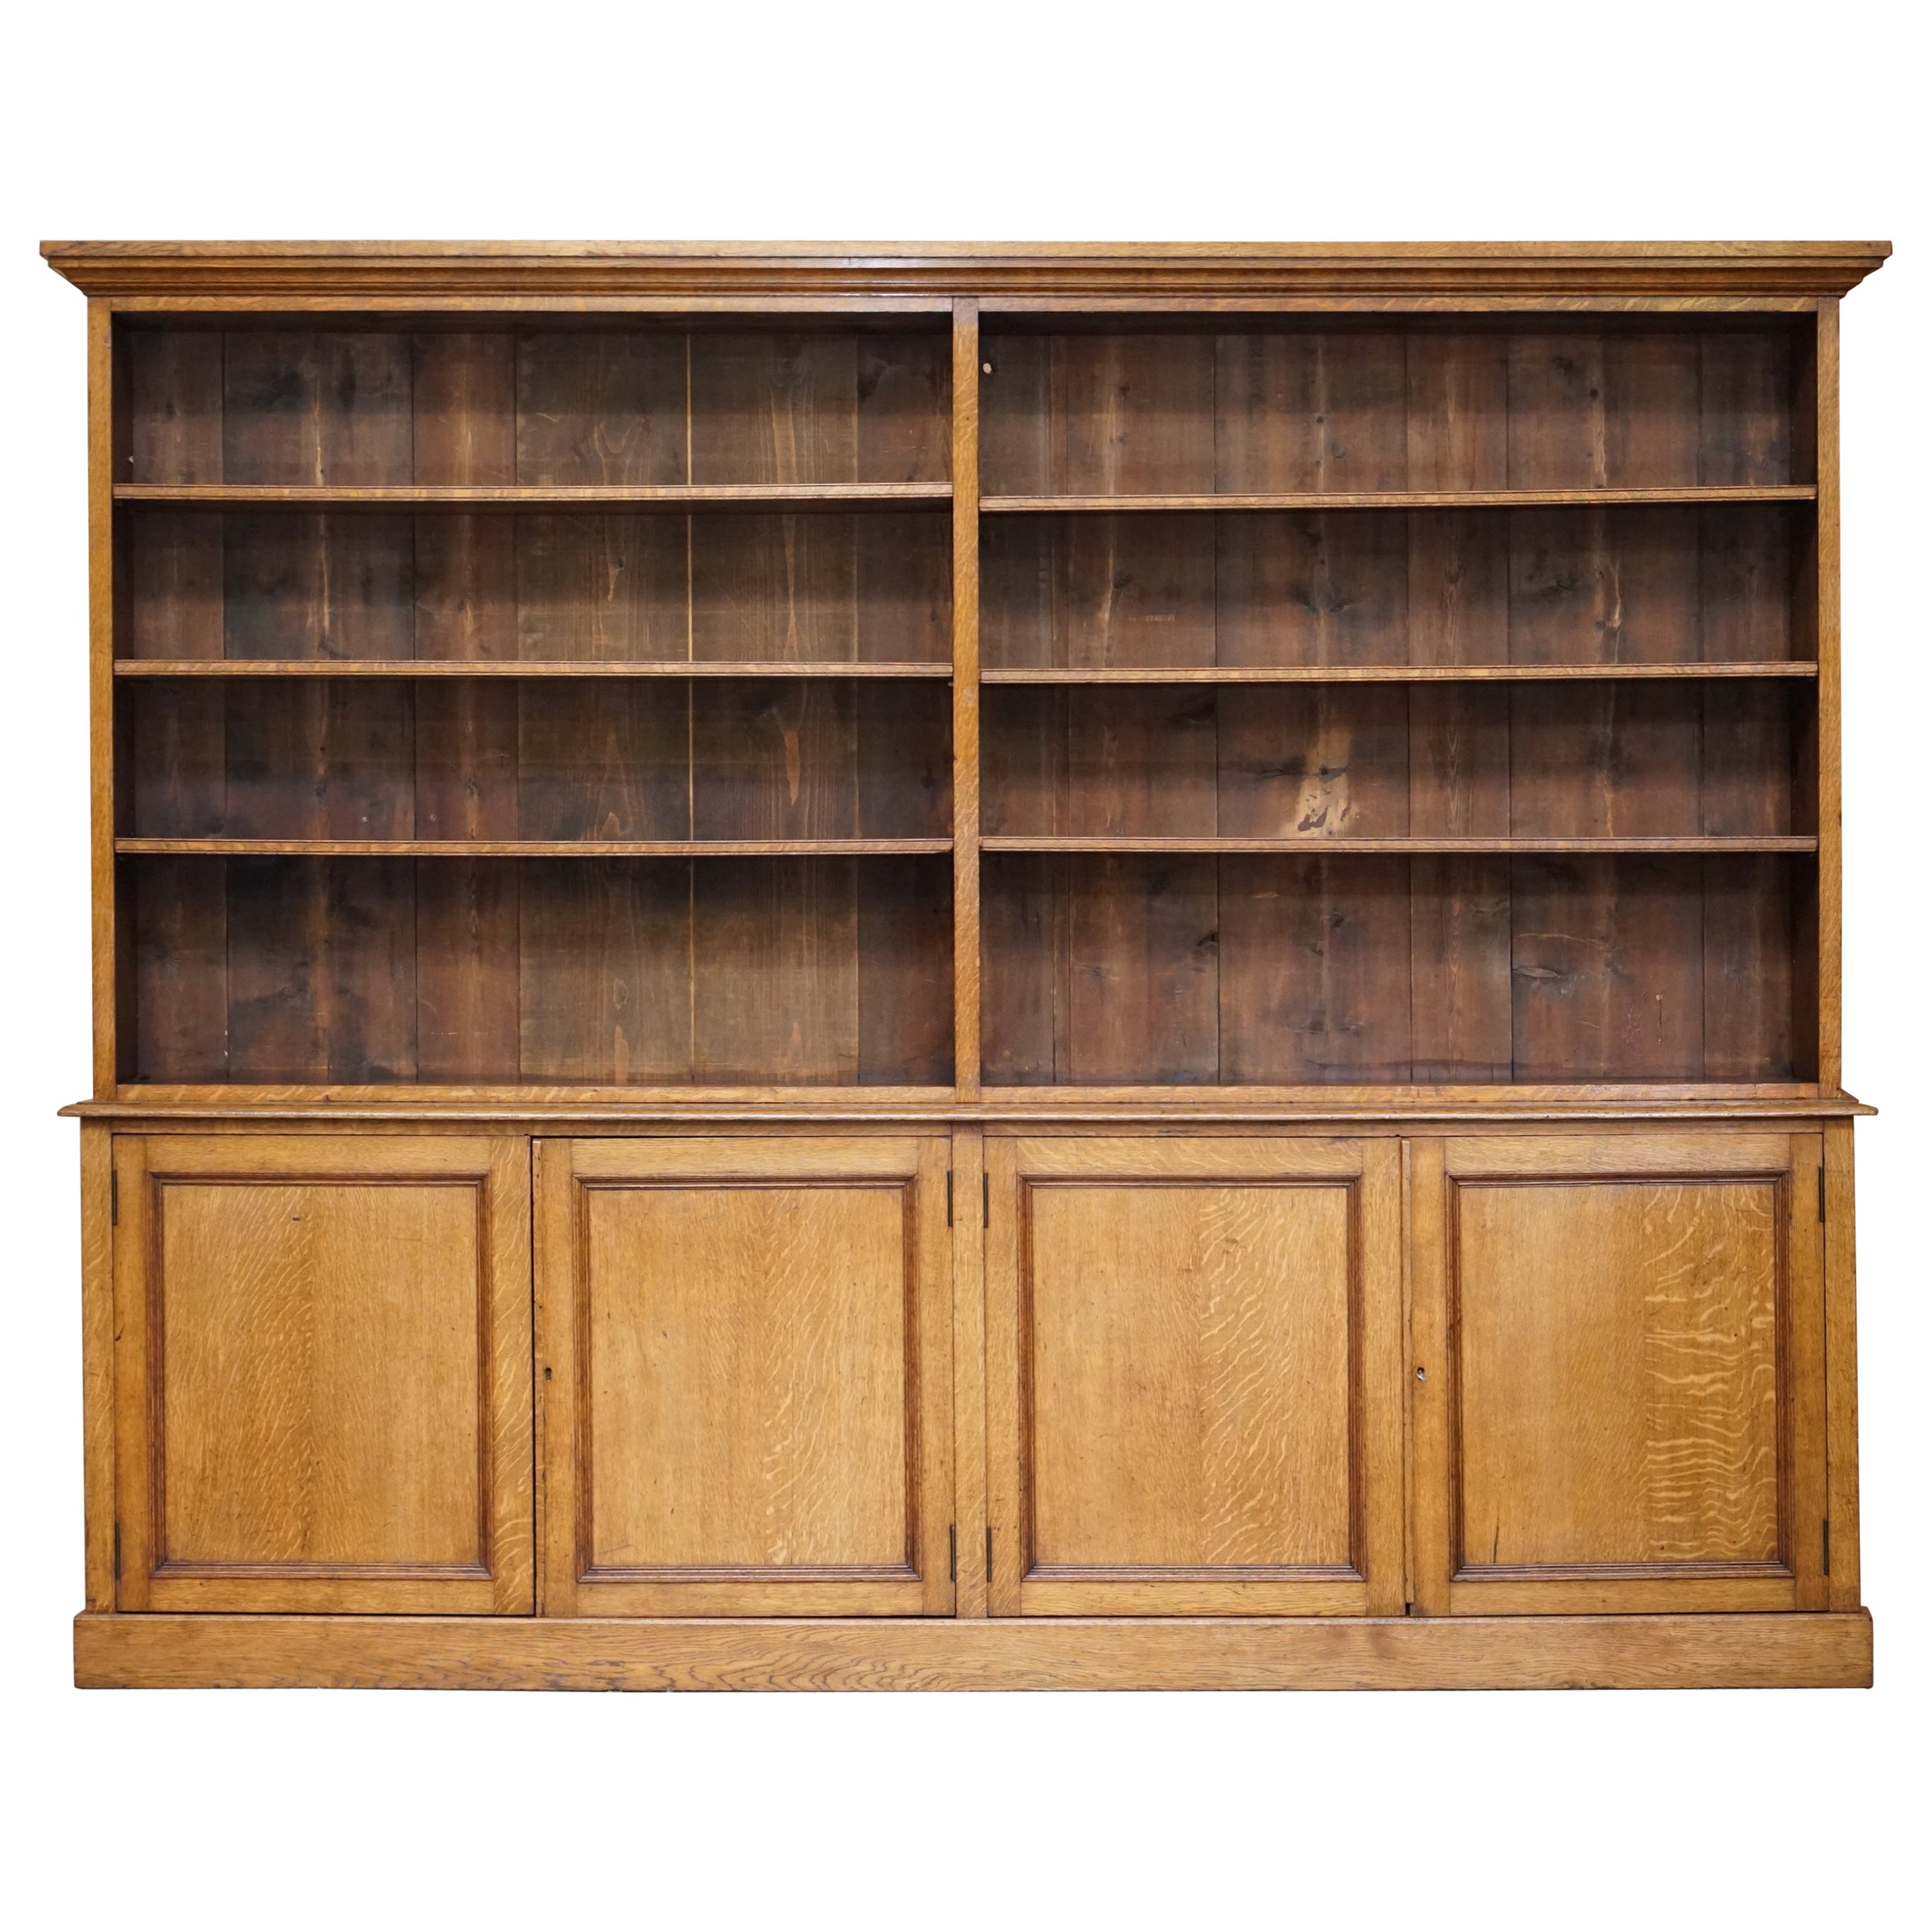 Stunning Large Antique Victorian Oak Library Bookcase Height Adjustable Shelves